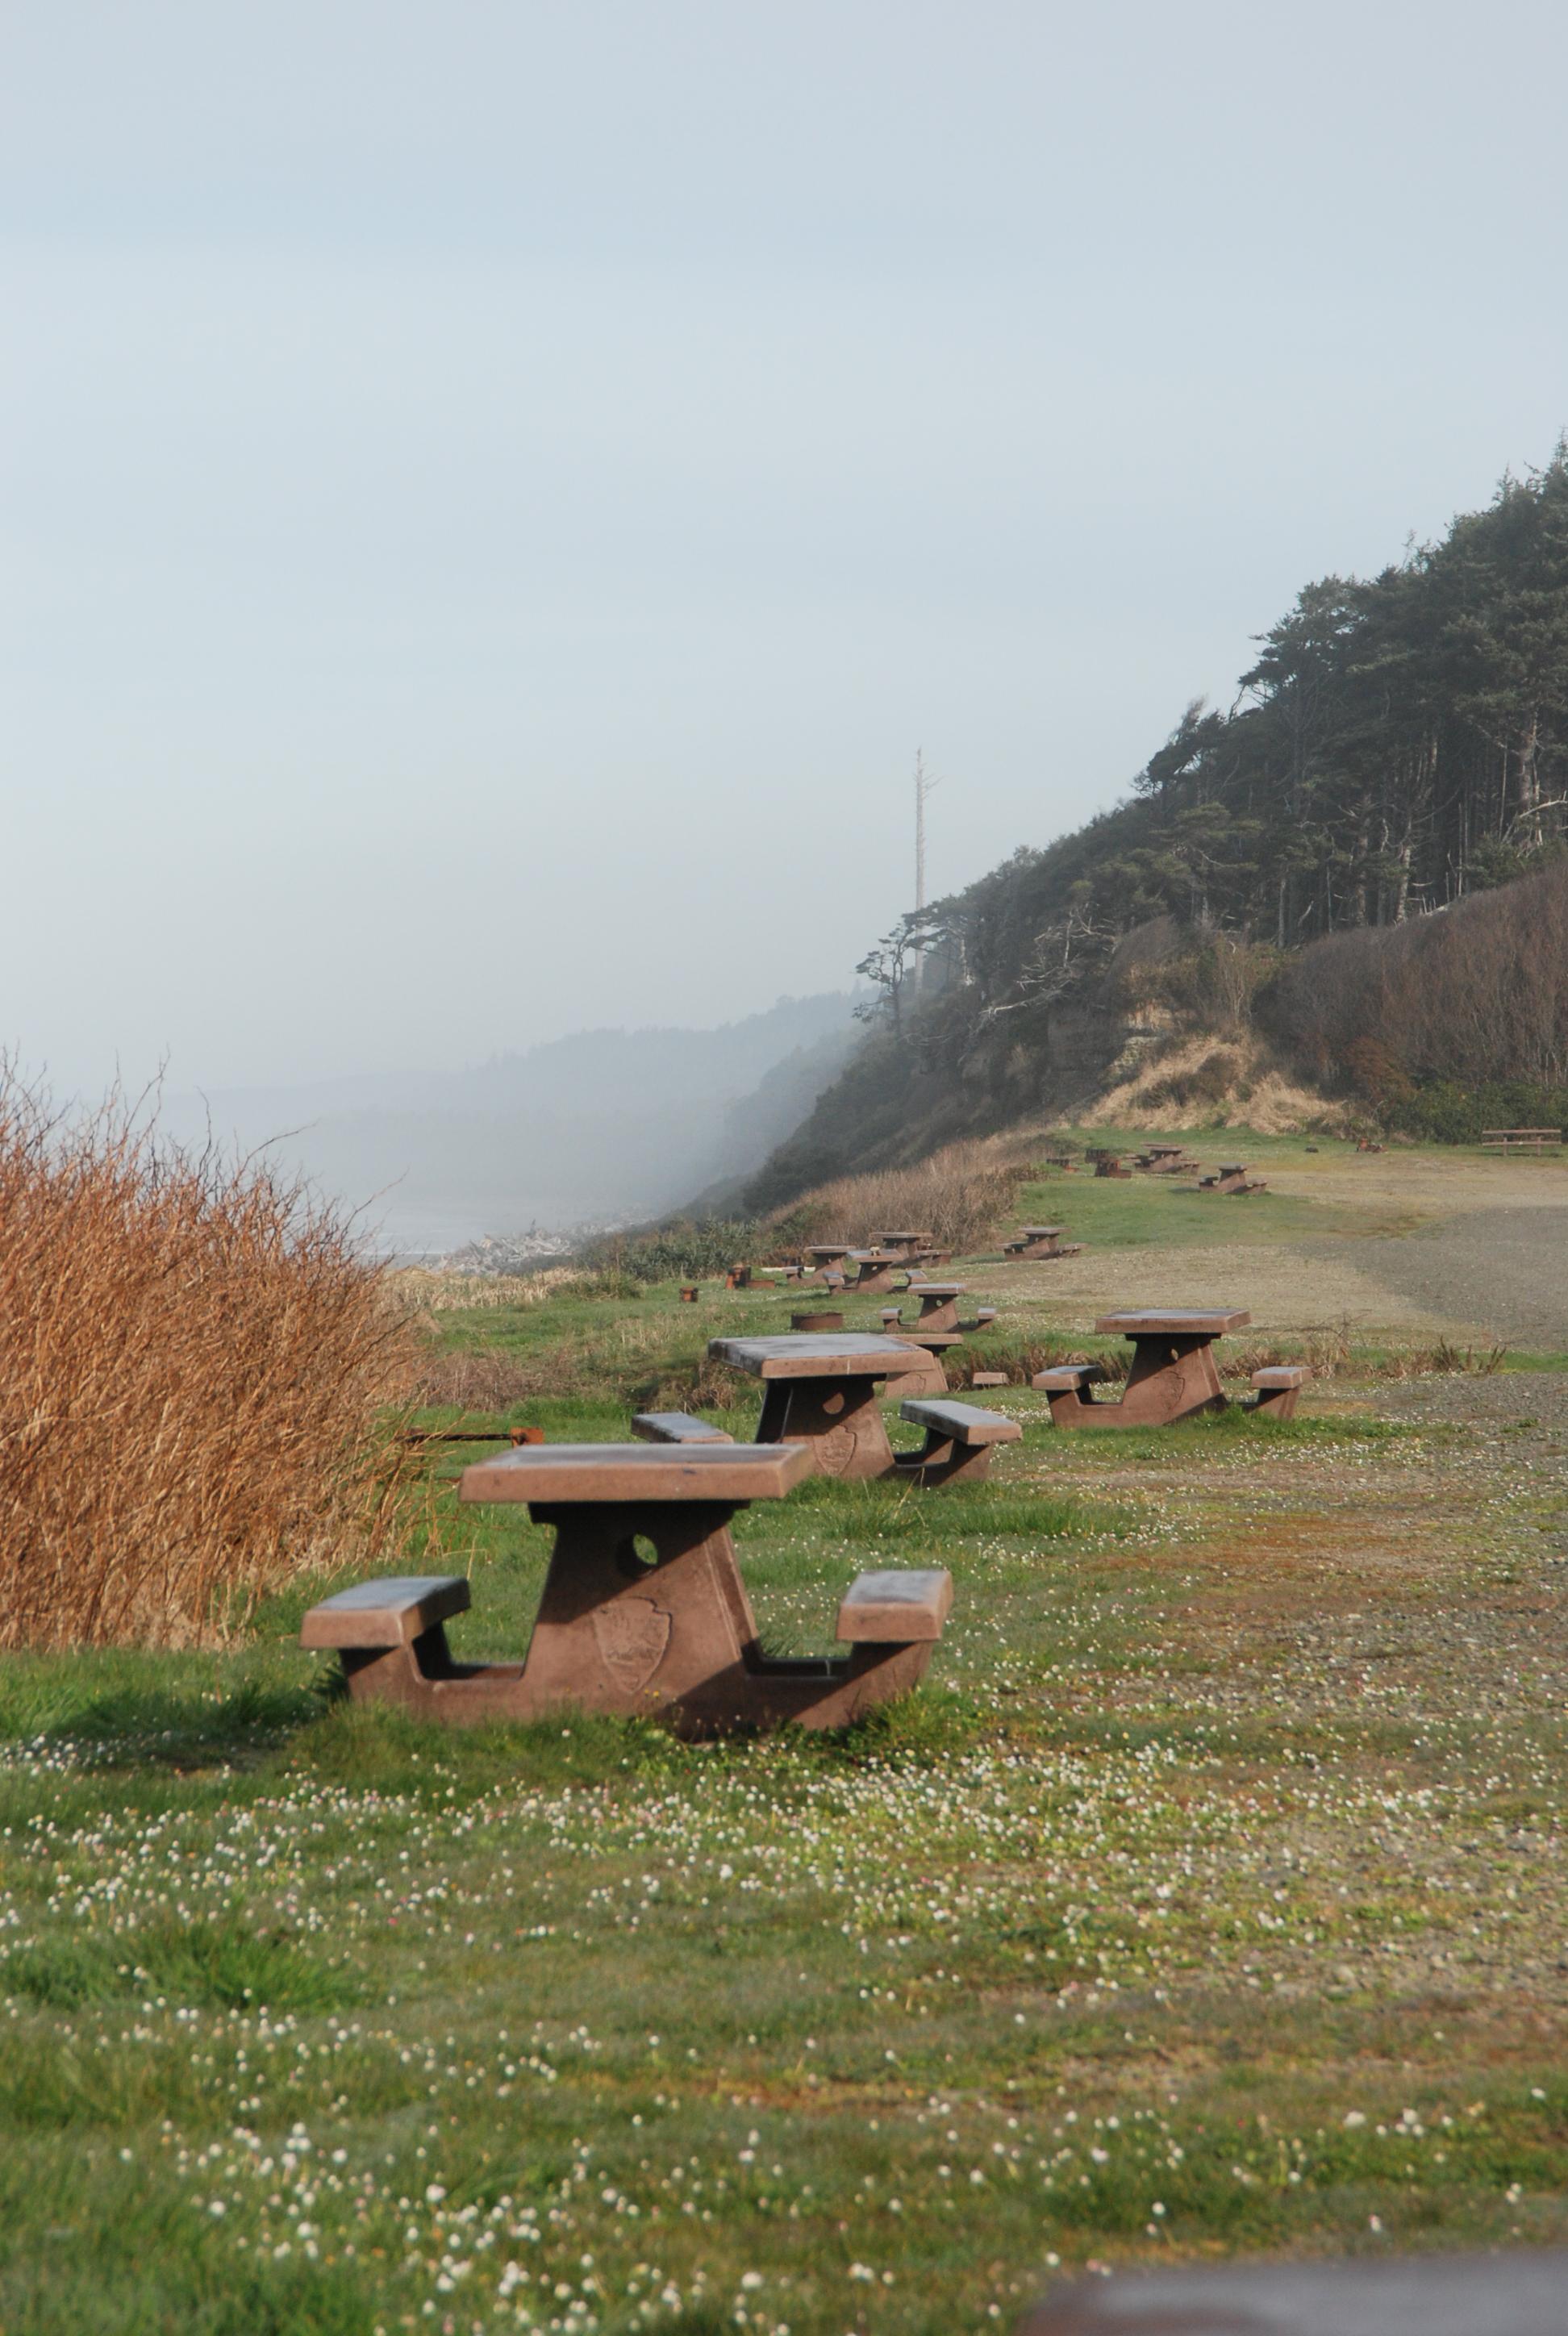 Picnic tables on a bluff overlooking the ocean.